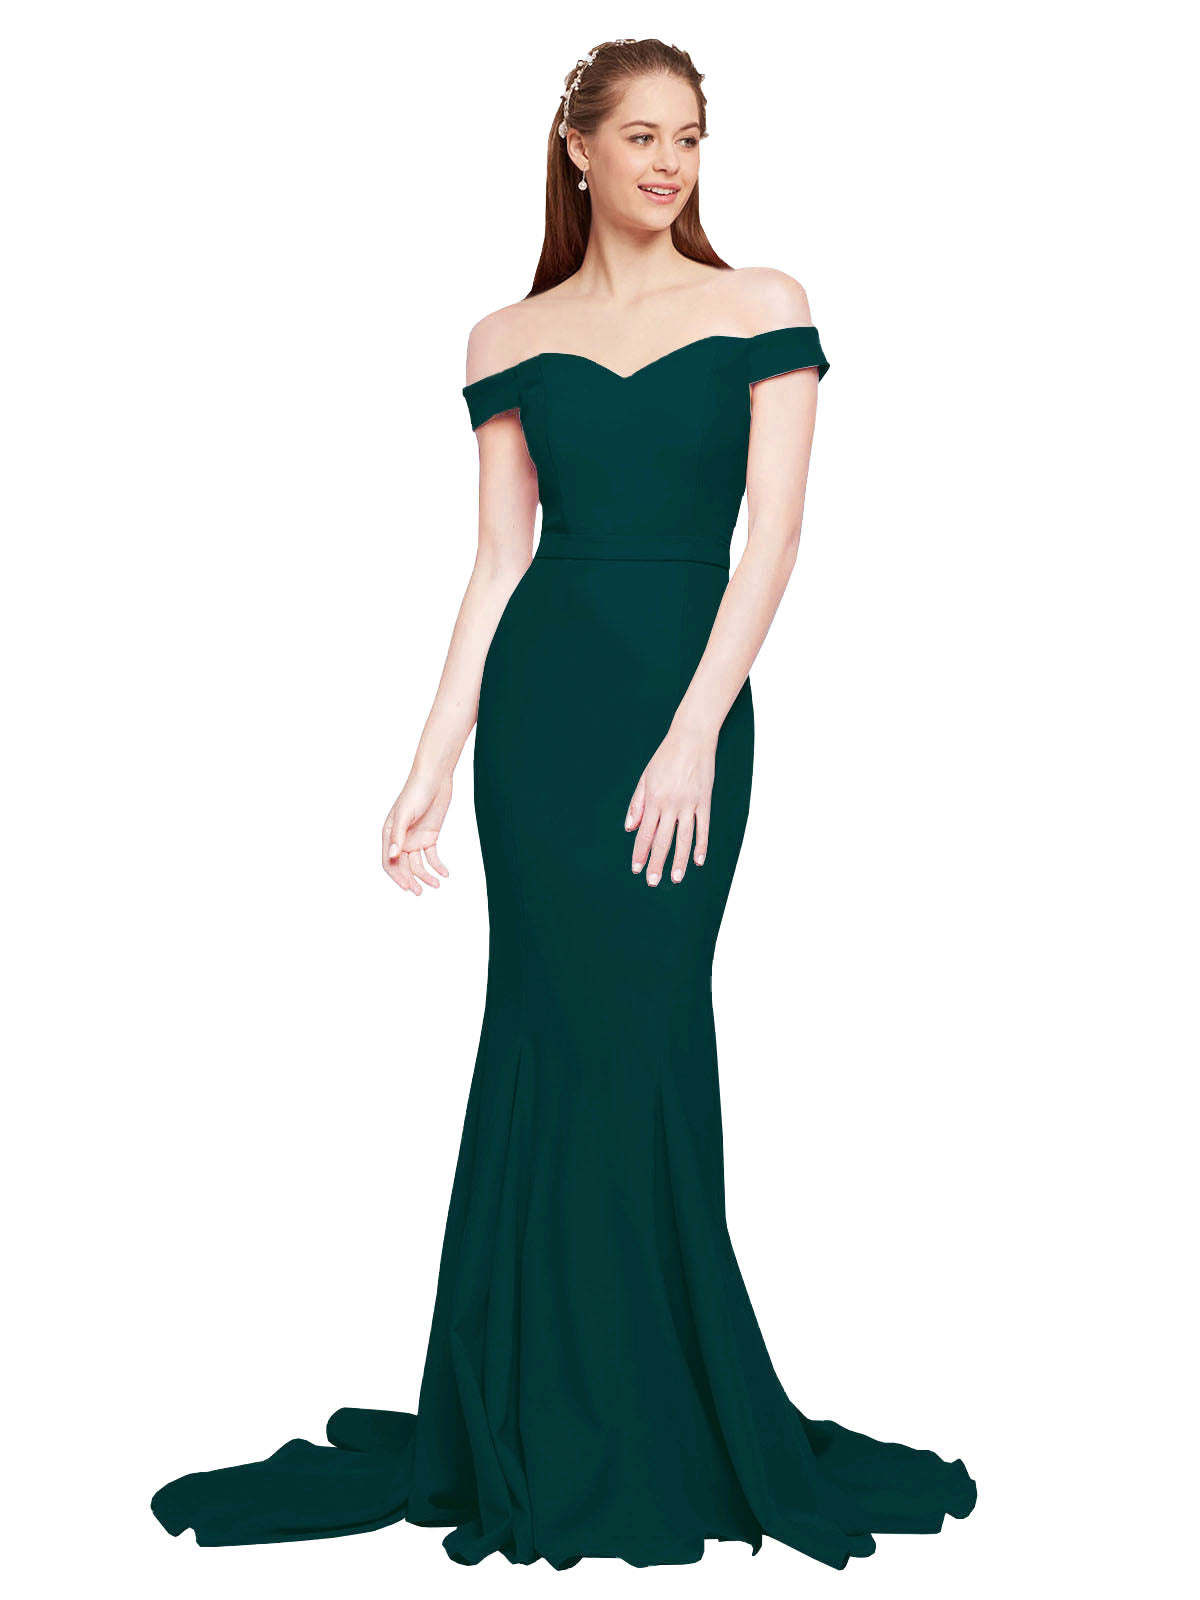 RightBrides Jannet Long Mermaid Off the Shoulder Sweetheart Sweep Train Floor Length Sleeveless Midnight Green Stretch Crepe Bridesmaid Dress